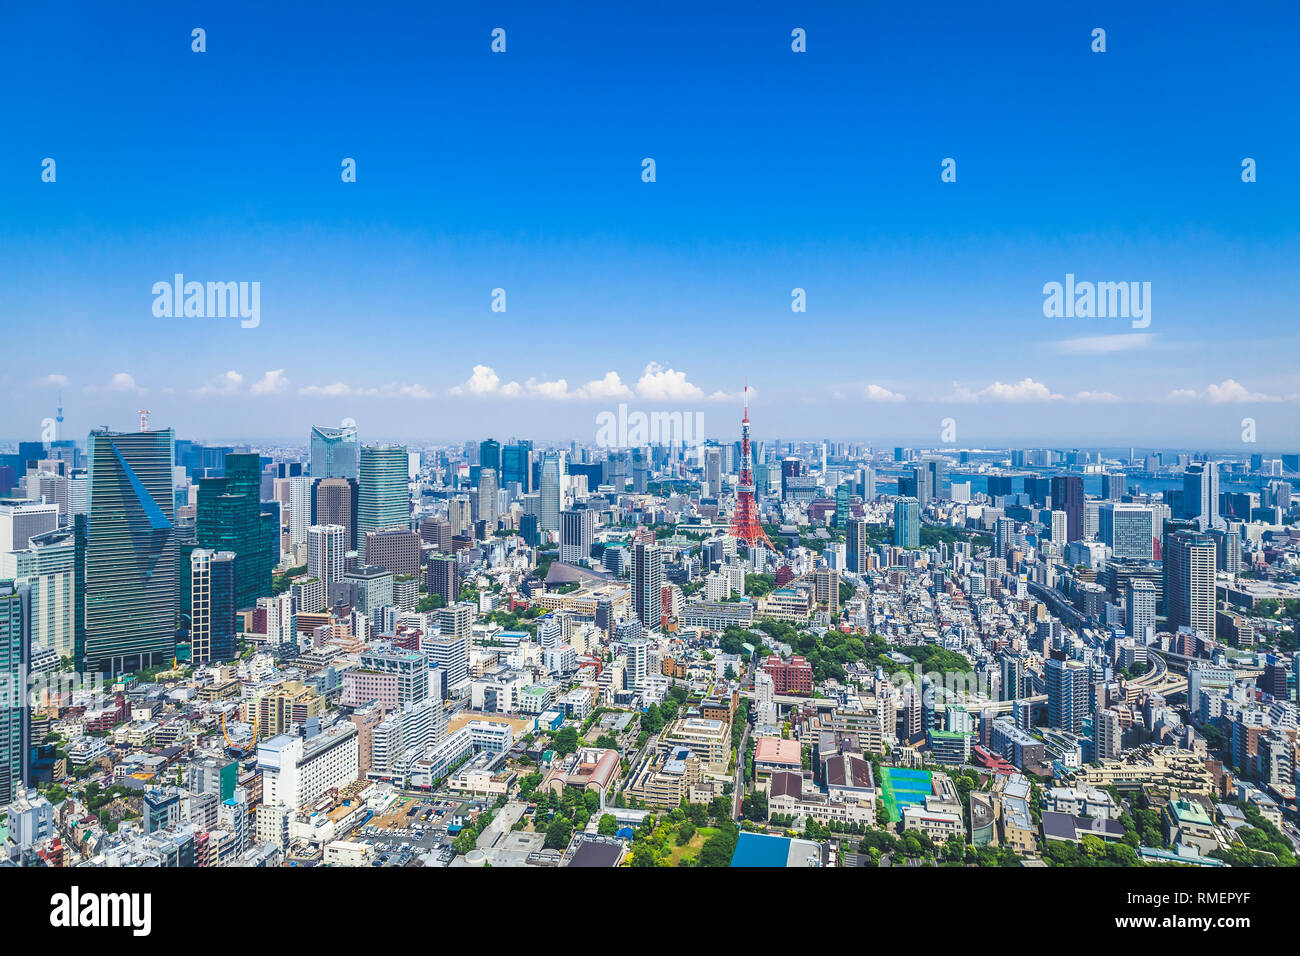 Tokyo / Japan - June 16 2017: Tokyo city building urban landscape aerial view from Roppongi Hills day time clear weather Stock Photo